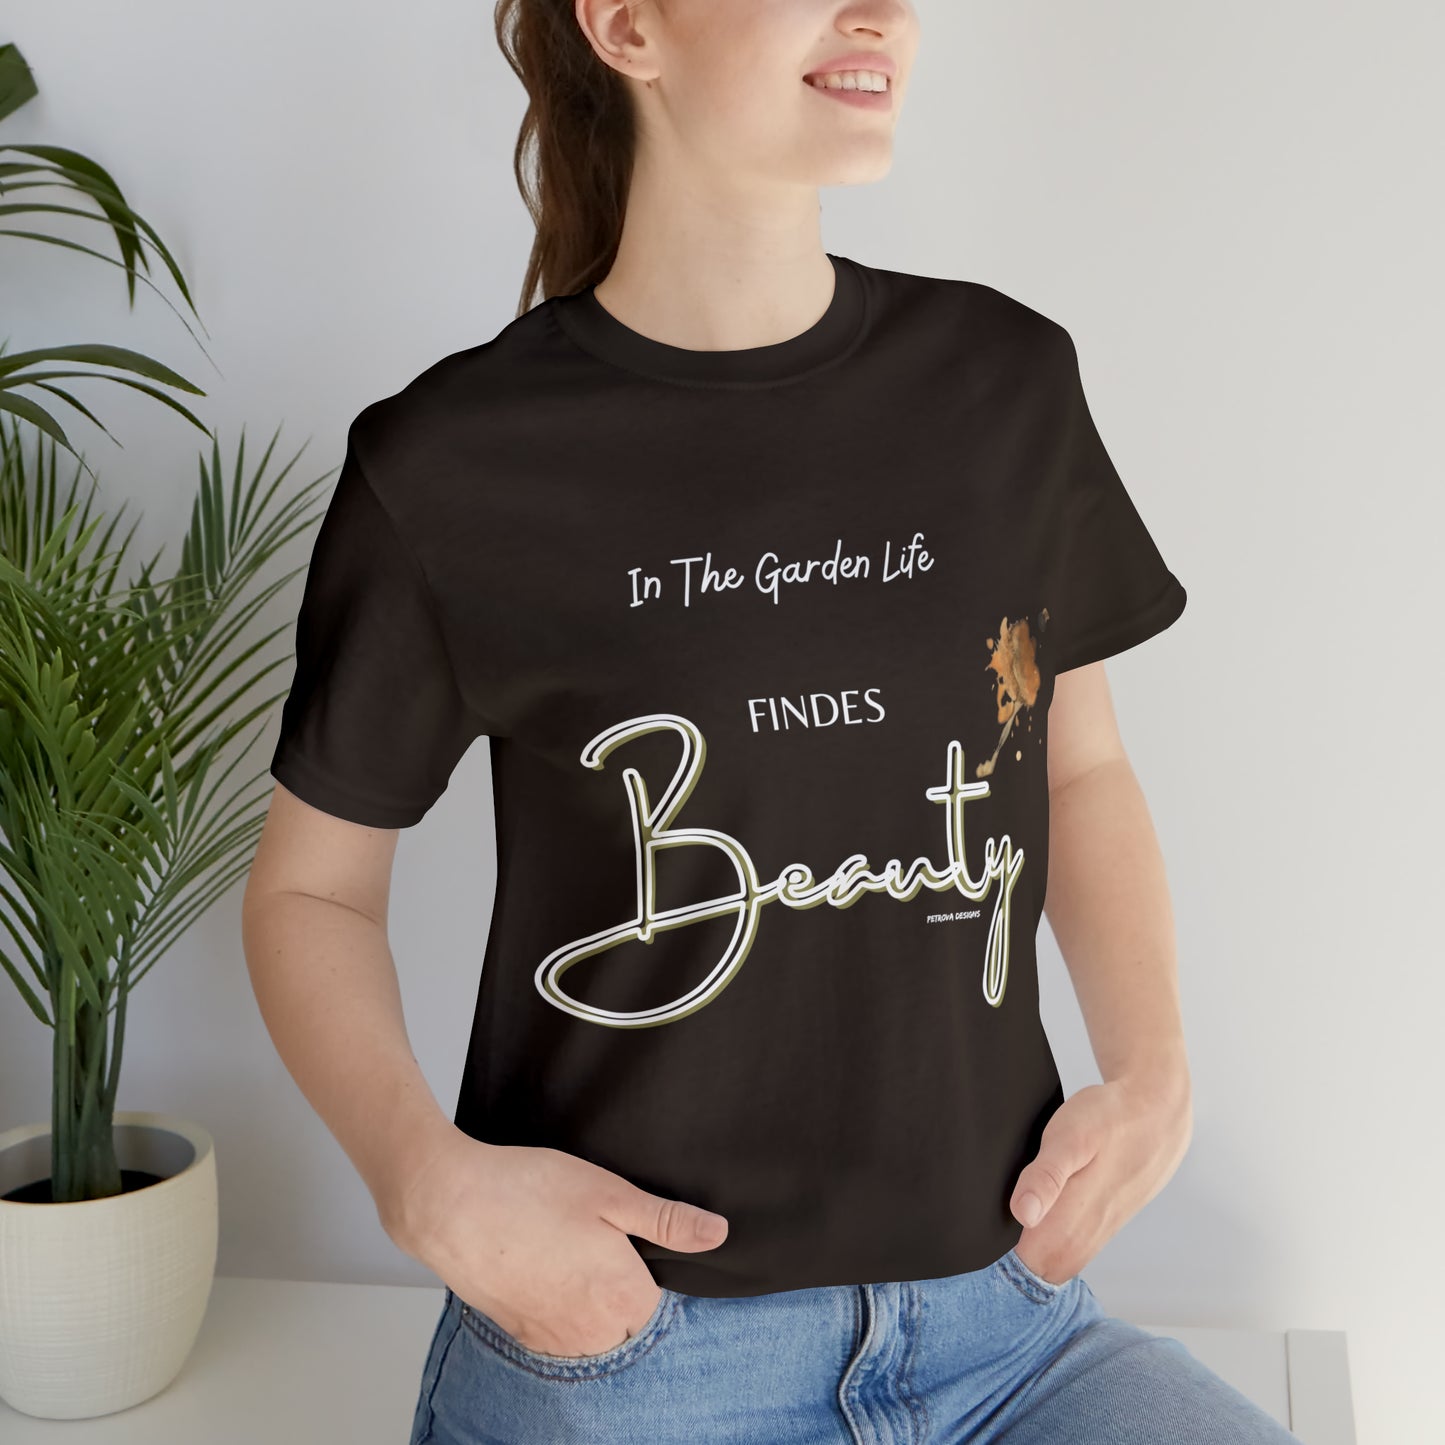 Brown T-Shirt Tshirt Design Gift for Friend and Family Short Sleeved Shirt Petrova Designs